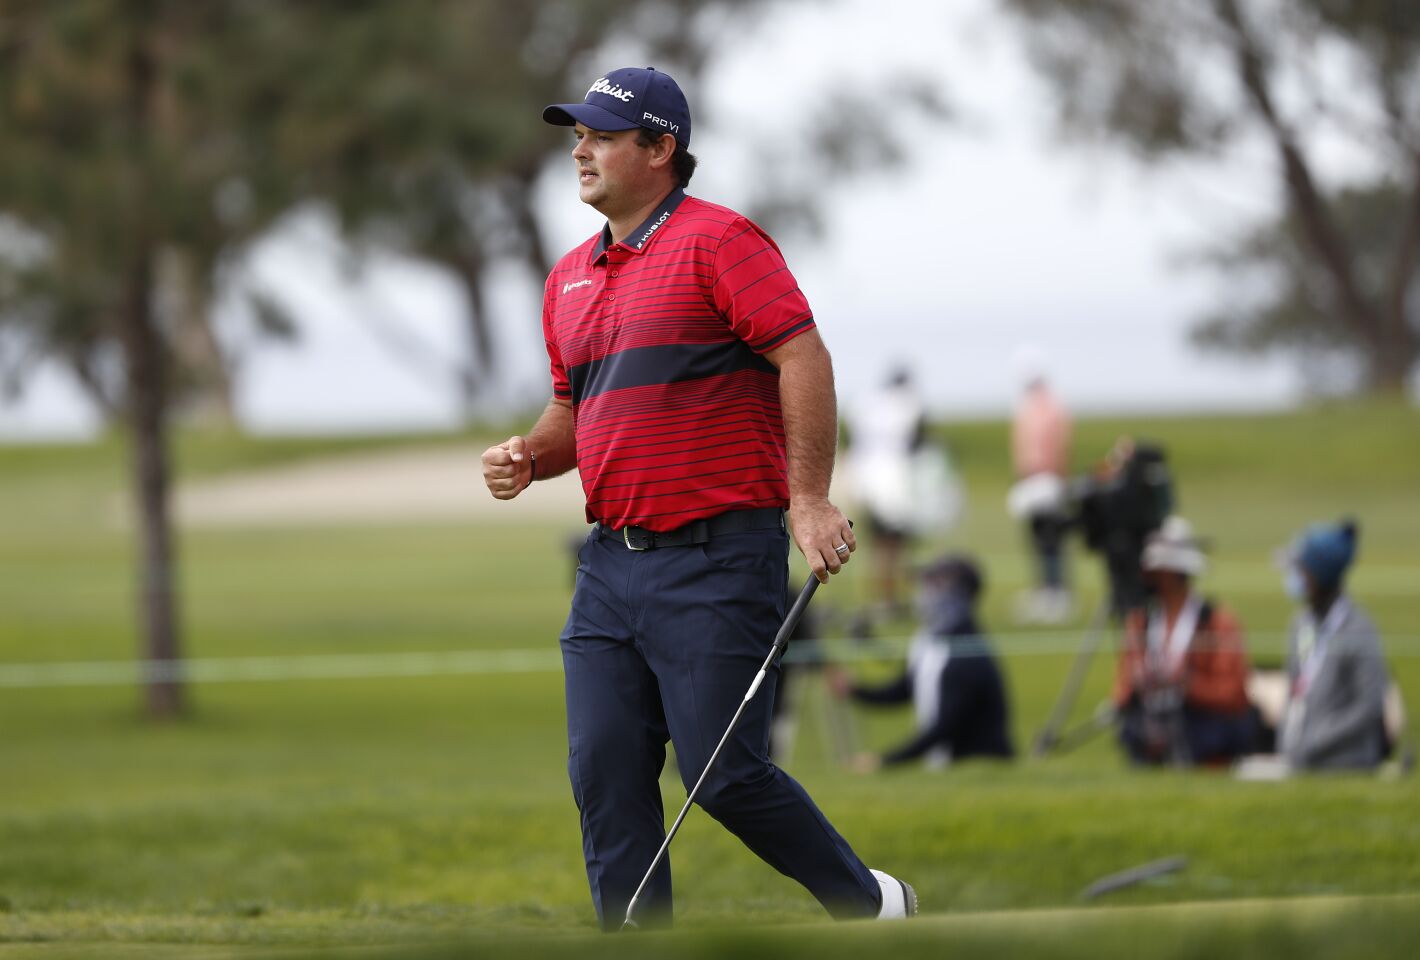 SAN DIEGO, CA - JANUARY 31: Patrick Reed celebrates an eagle putt on the 6th hole during final round of the Farmers Insurance Open at Torrey Pines on Sunday, Jan. 31, 2021 in San Diego, CA. (K.C. Alfred / The San Diego Union-Tribune)